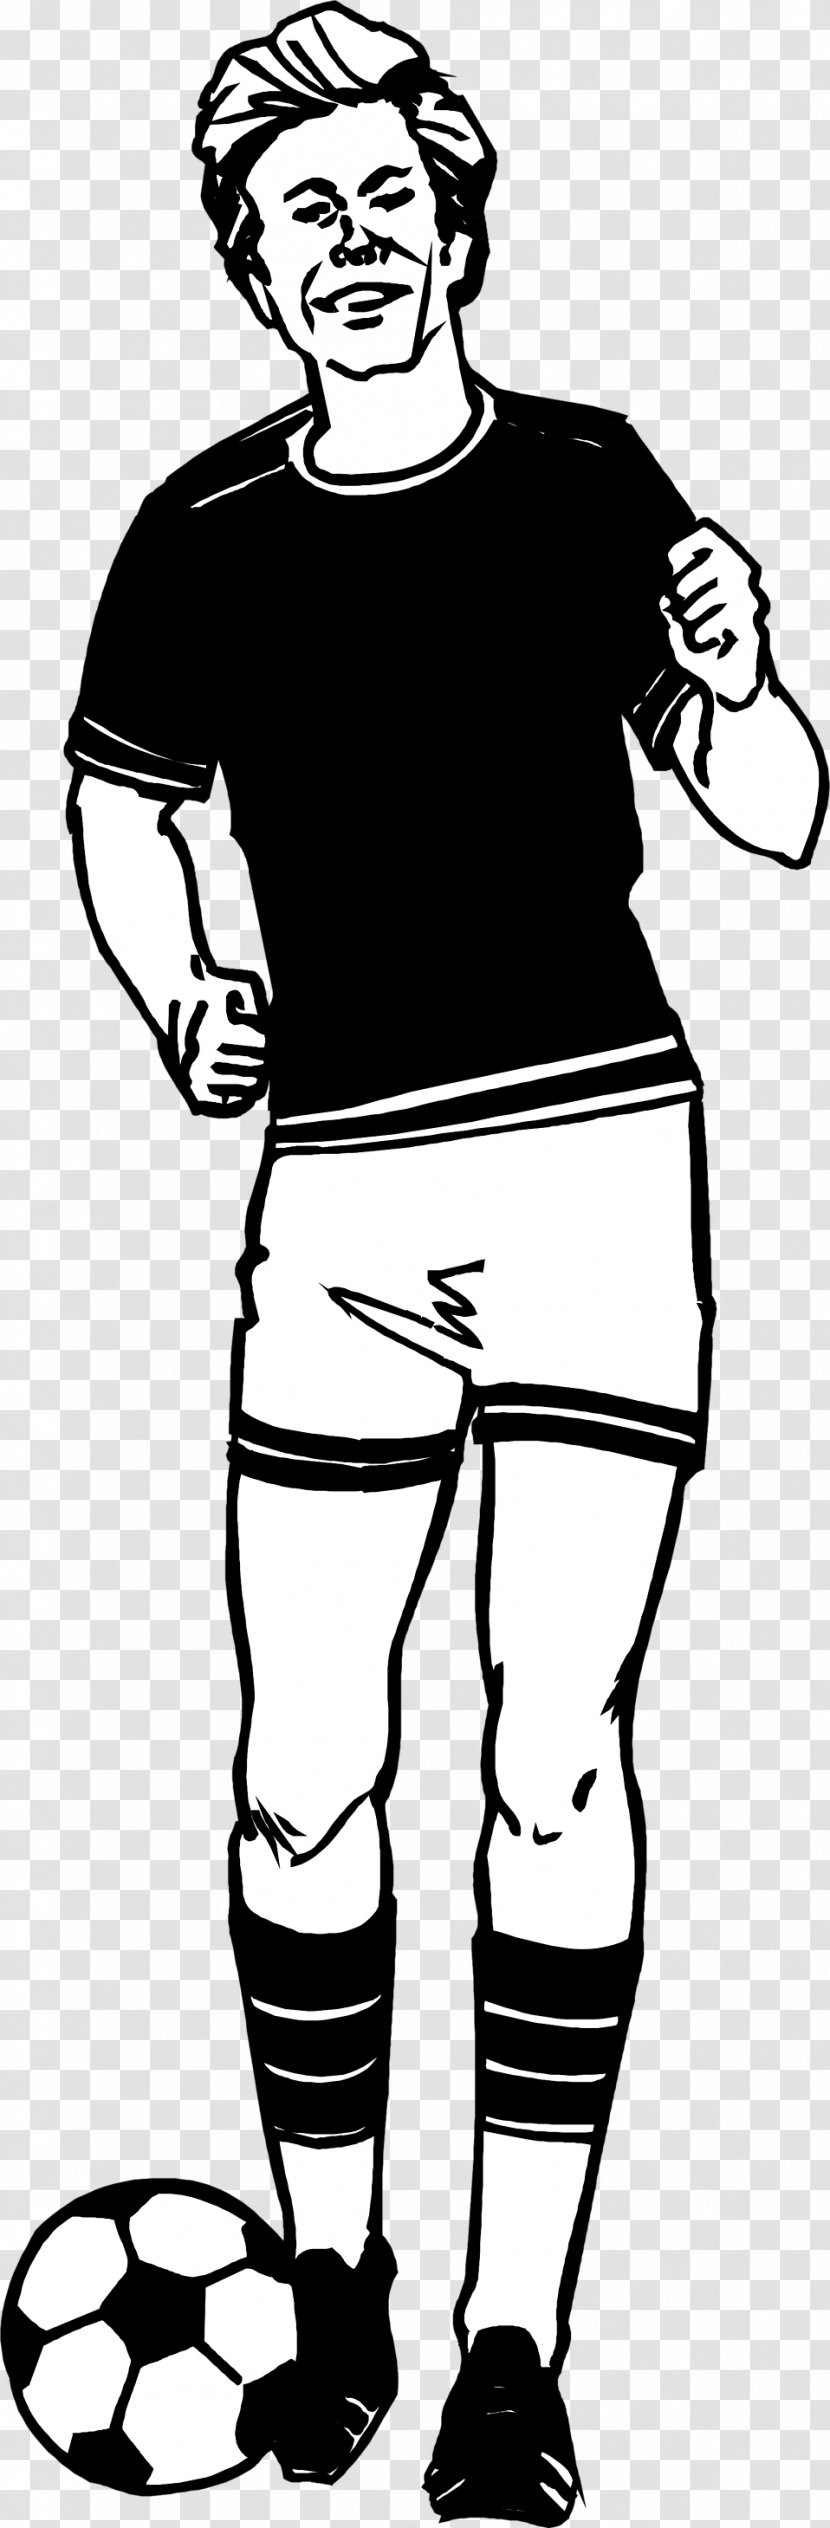 Animaatio Drawing Clip Art - Black And White - Soccer Player Illustration Transparent PNG